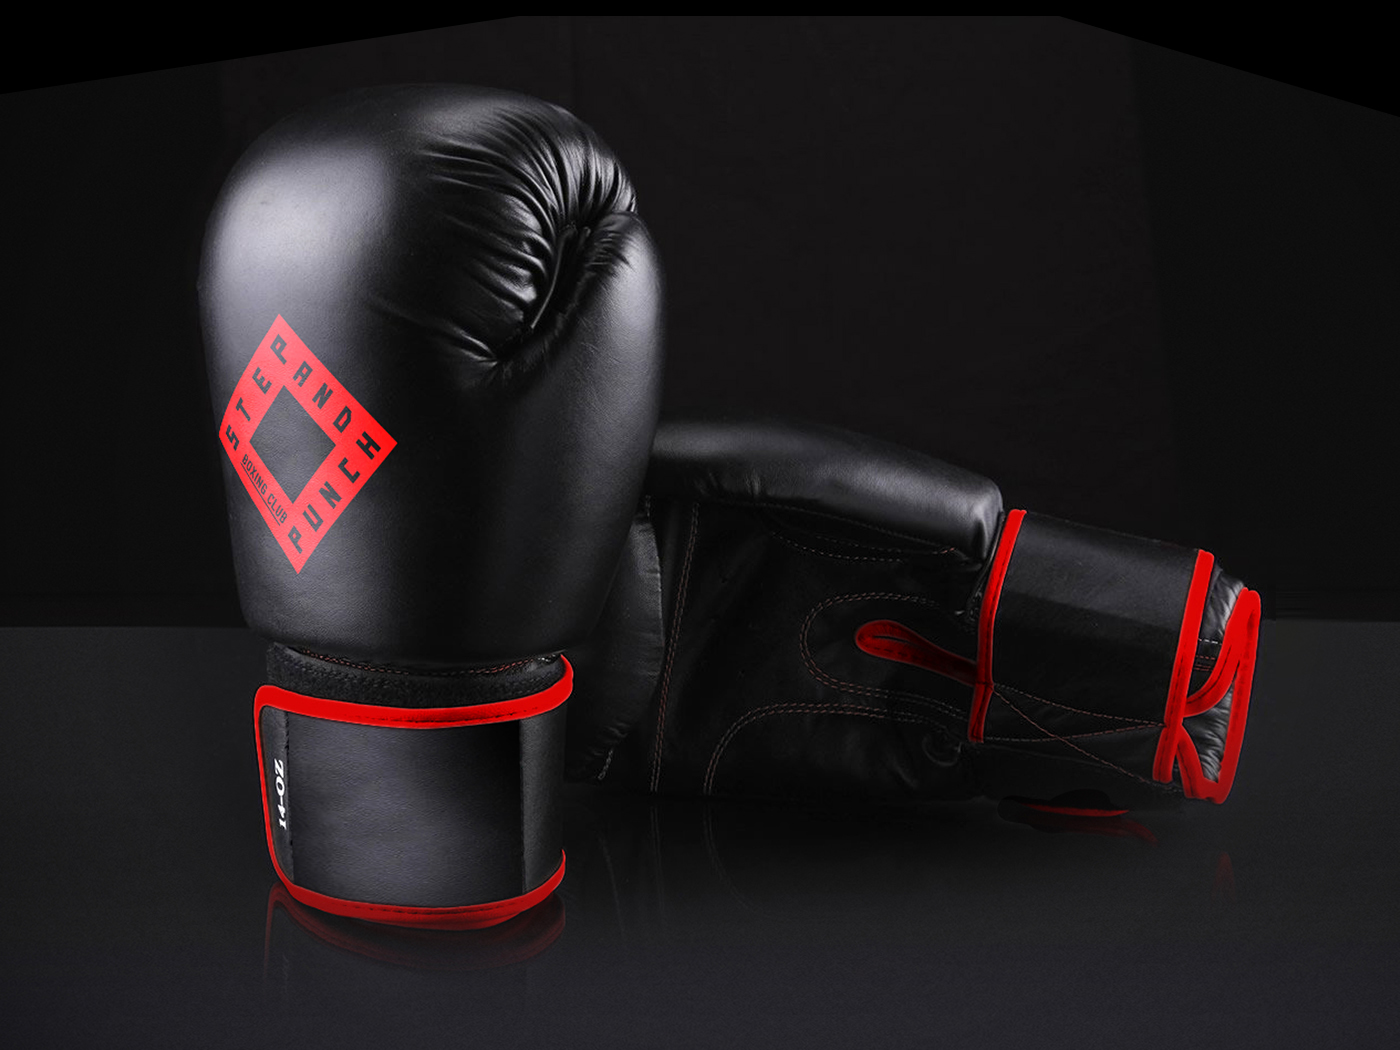 rhombus Boxing sports constructivism Clarendon neon fight ring punch black red geometric brutal diamond  fitness